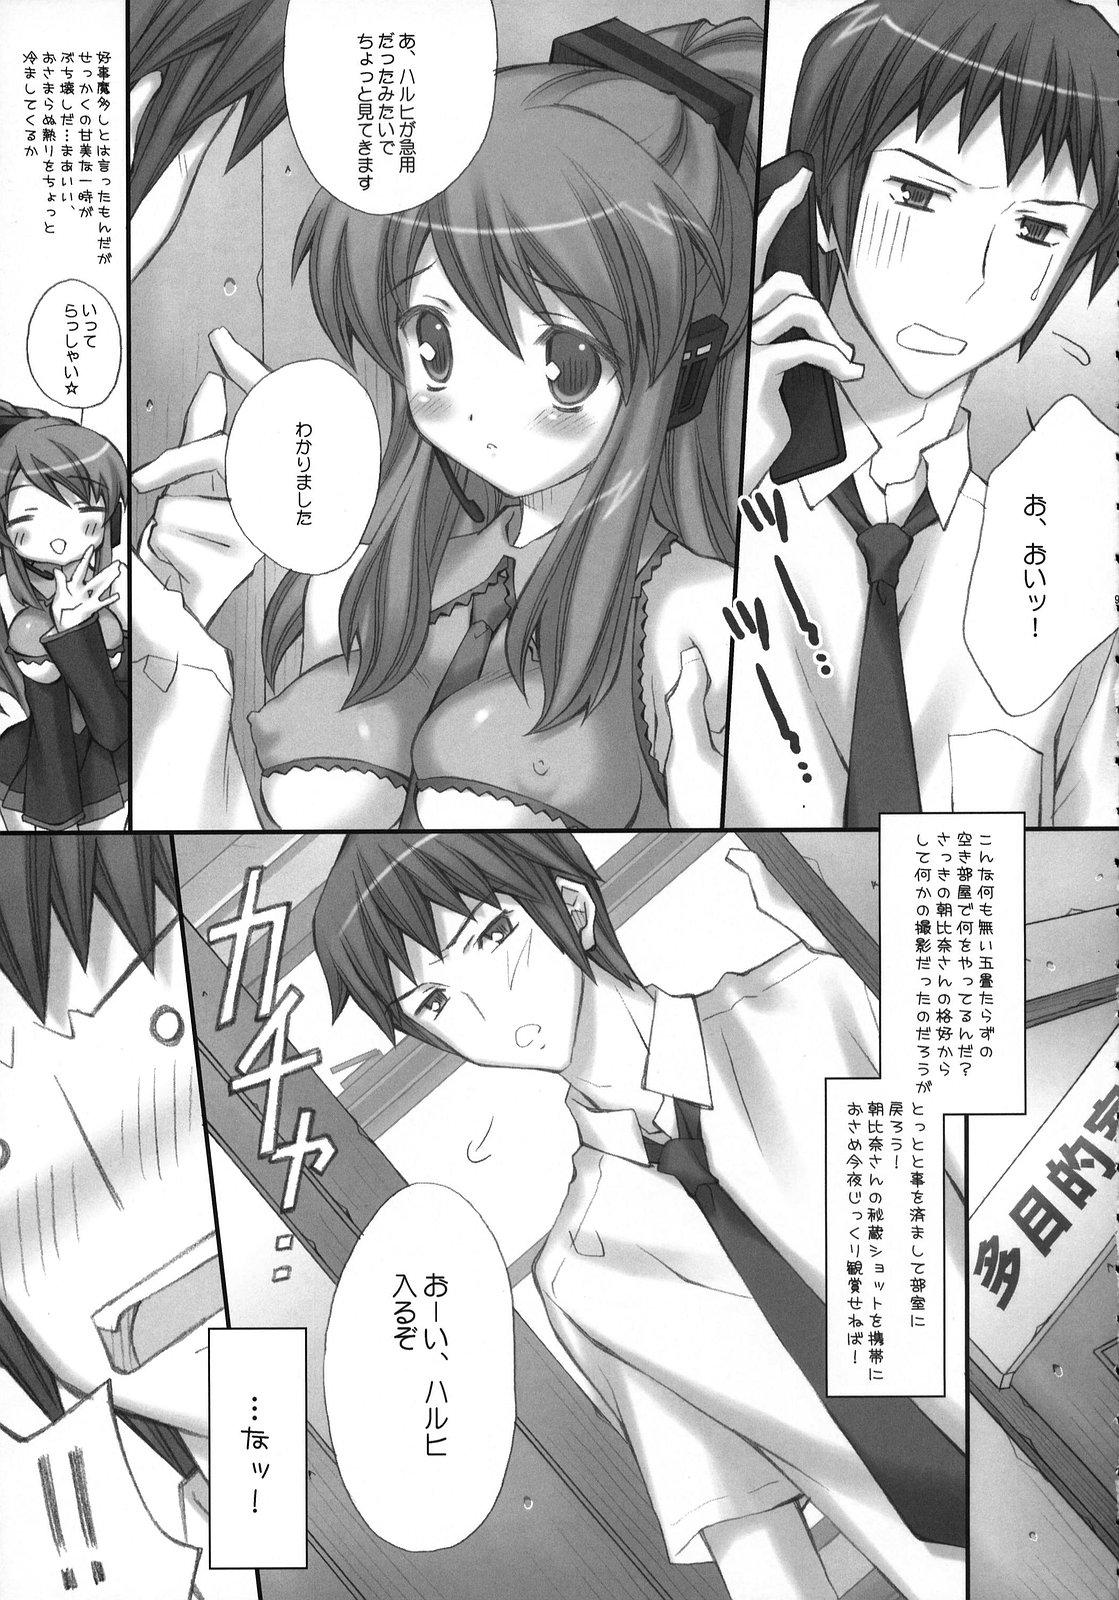 Show ponytail syndrome - The melancholy of haruhi suzumiya High Definition - Page 8